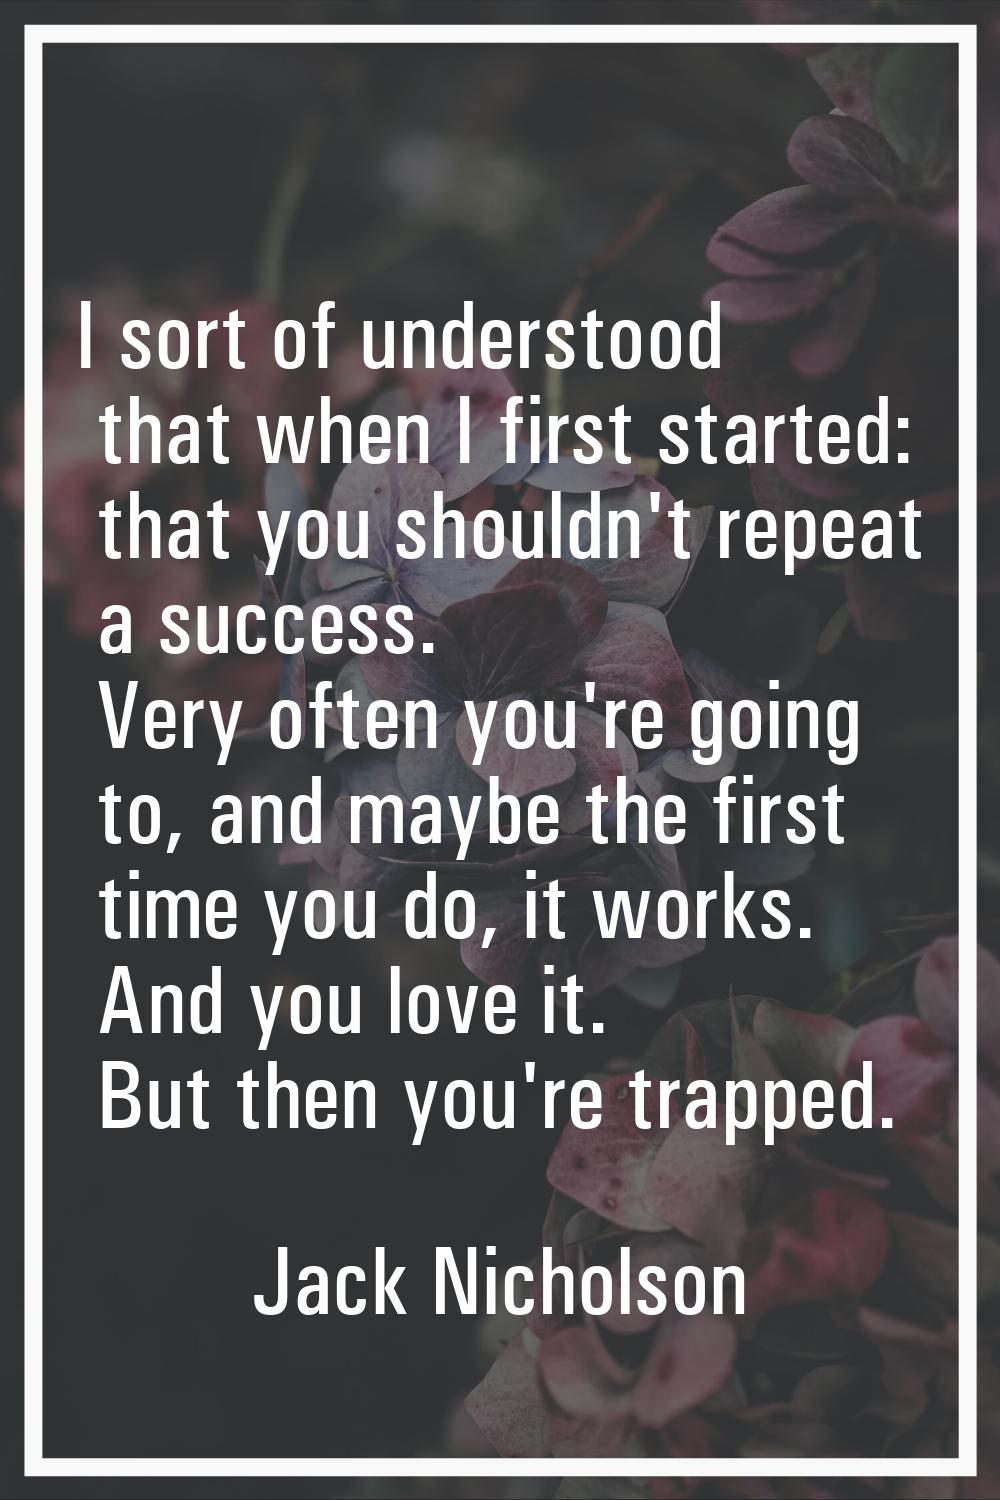 I sort of understood that when I first started: that you shouldn't repeat a success. Very often you